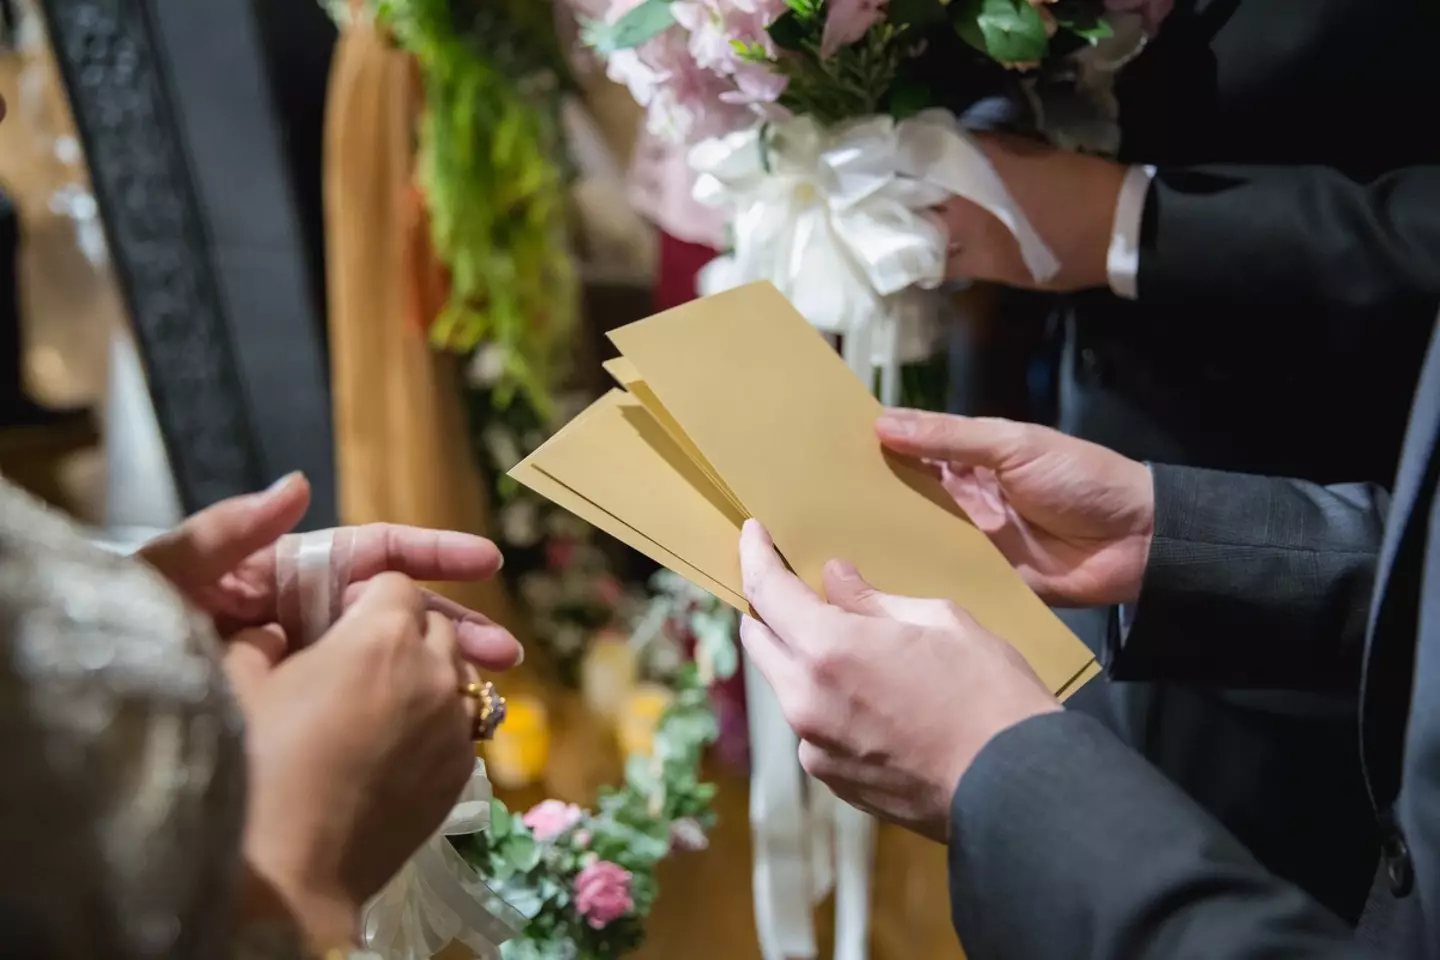 A groom got the perfect revenge on his cheating bride who thought she could get away with ‘f**king the best man’.